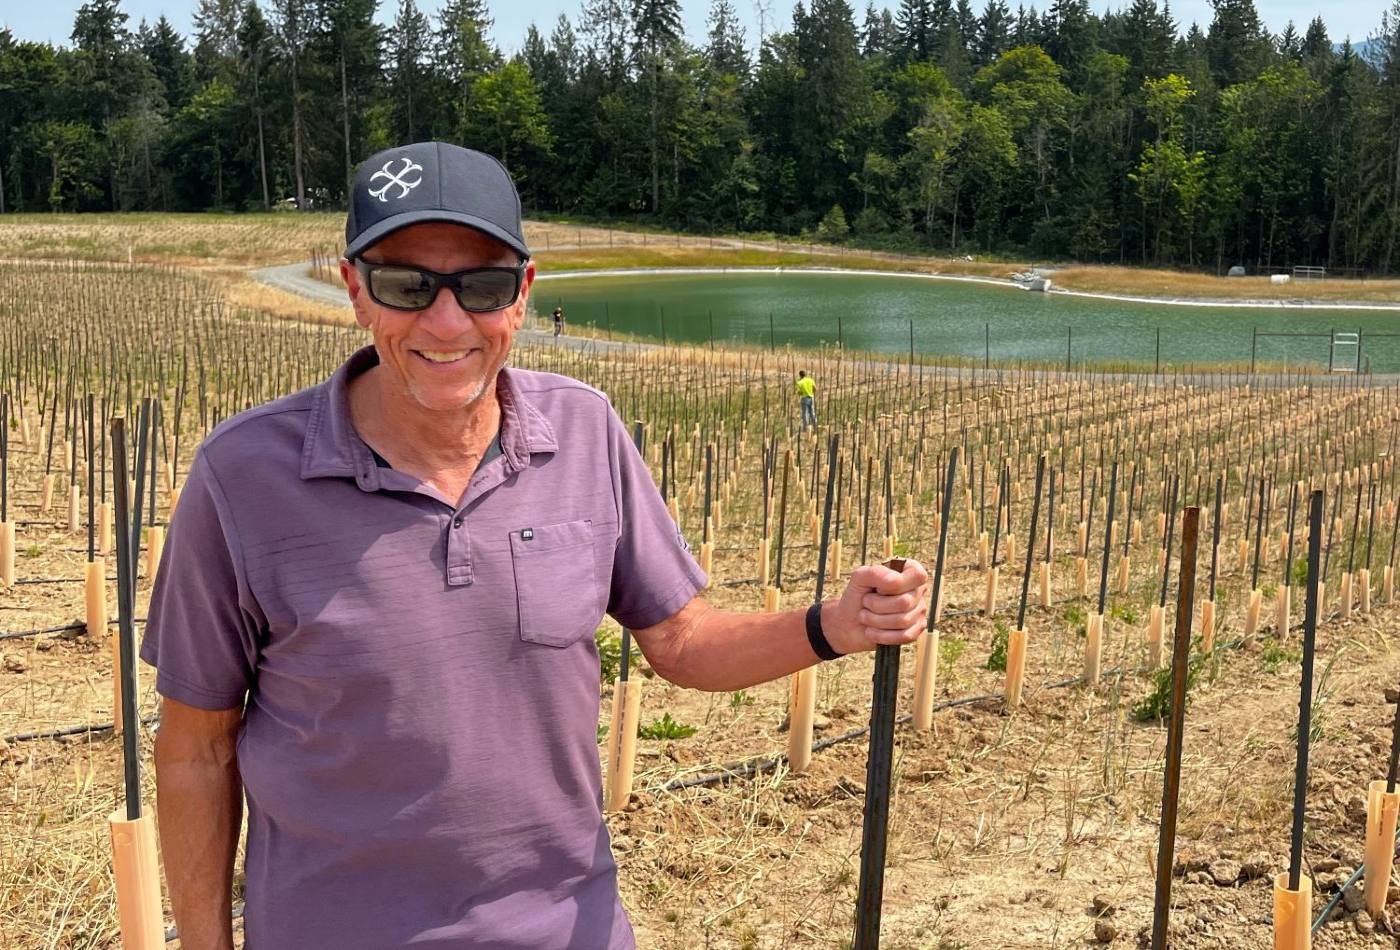 A late middle-aged white man in ball cap and sunglasses and a short sleeved collared shirt stands amidst young grape vines growing in rows, with a pond and strip of forest behind him. 